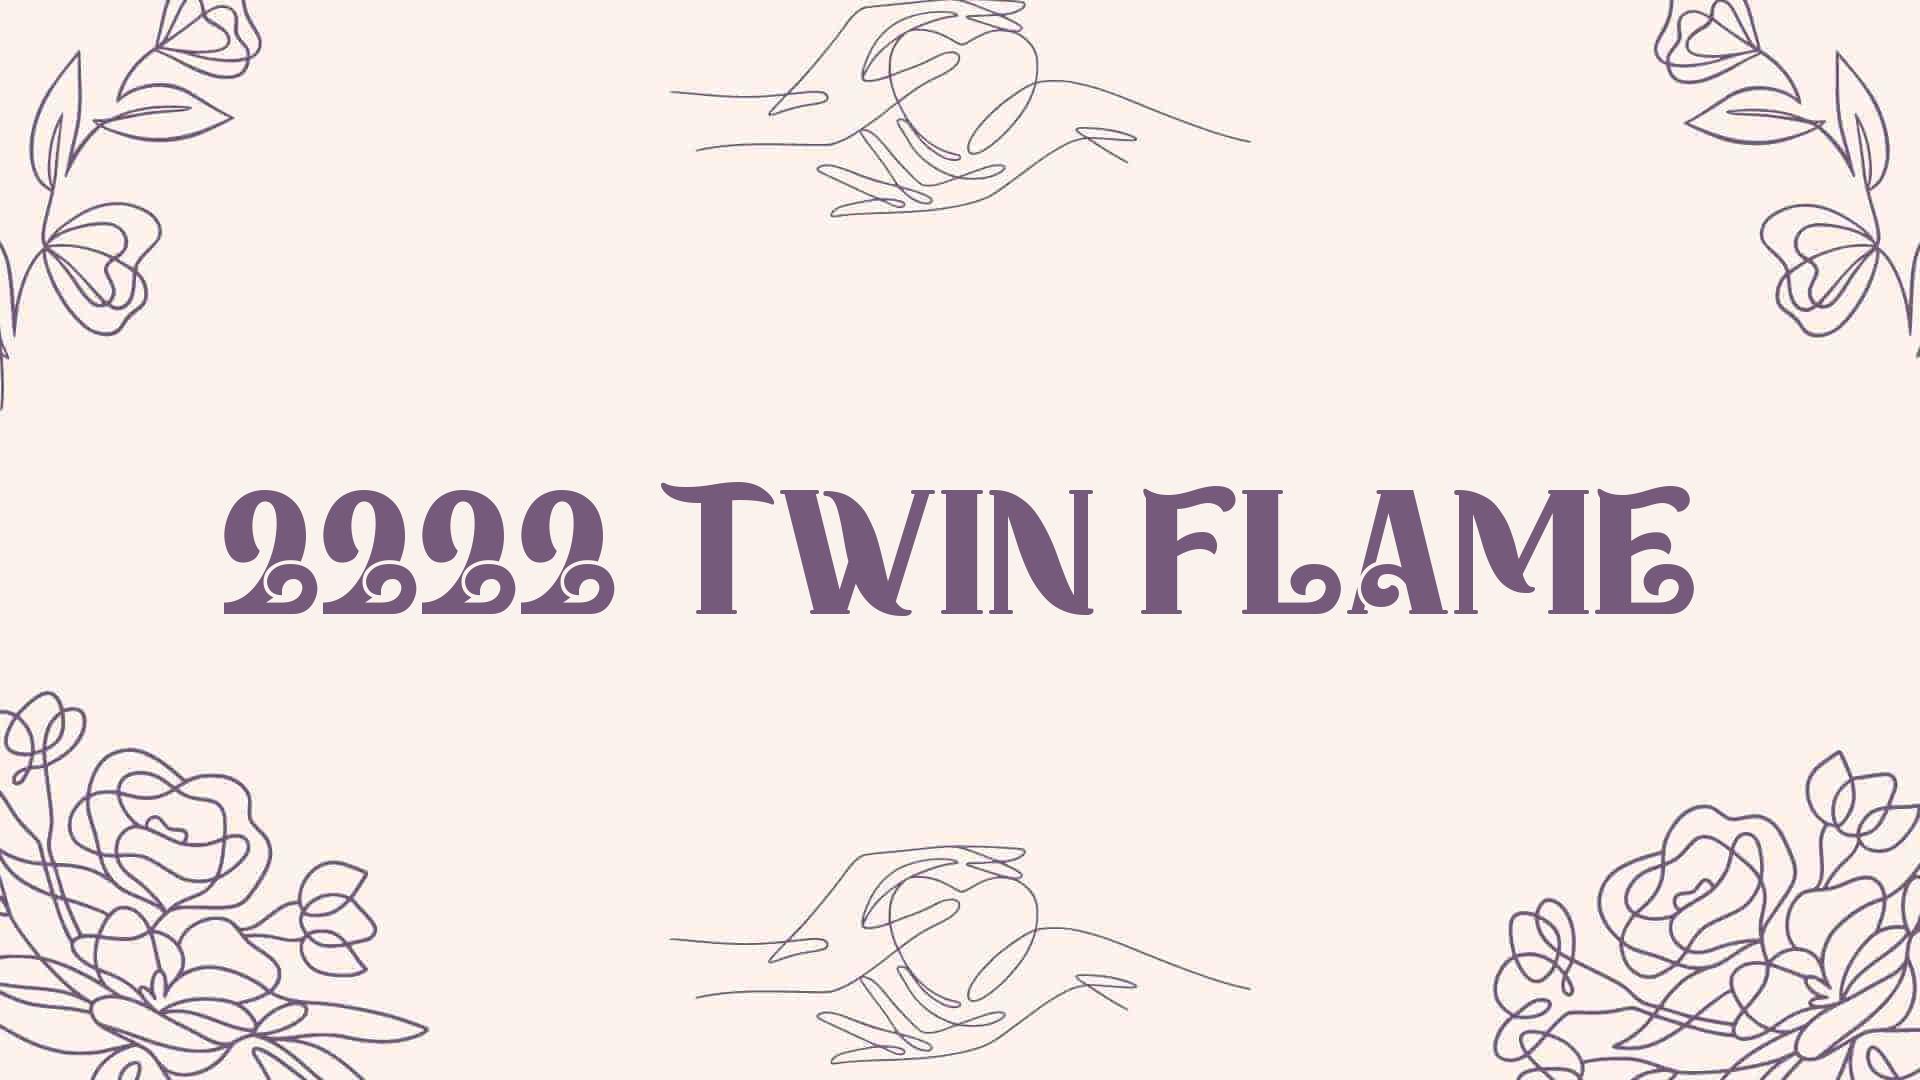 2222 twin flame [ Meaning Revealed ]